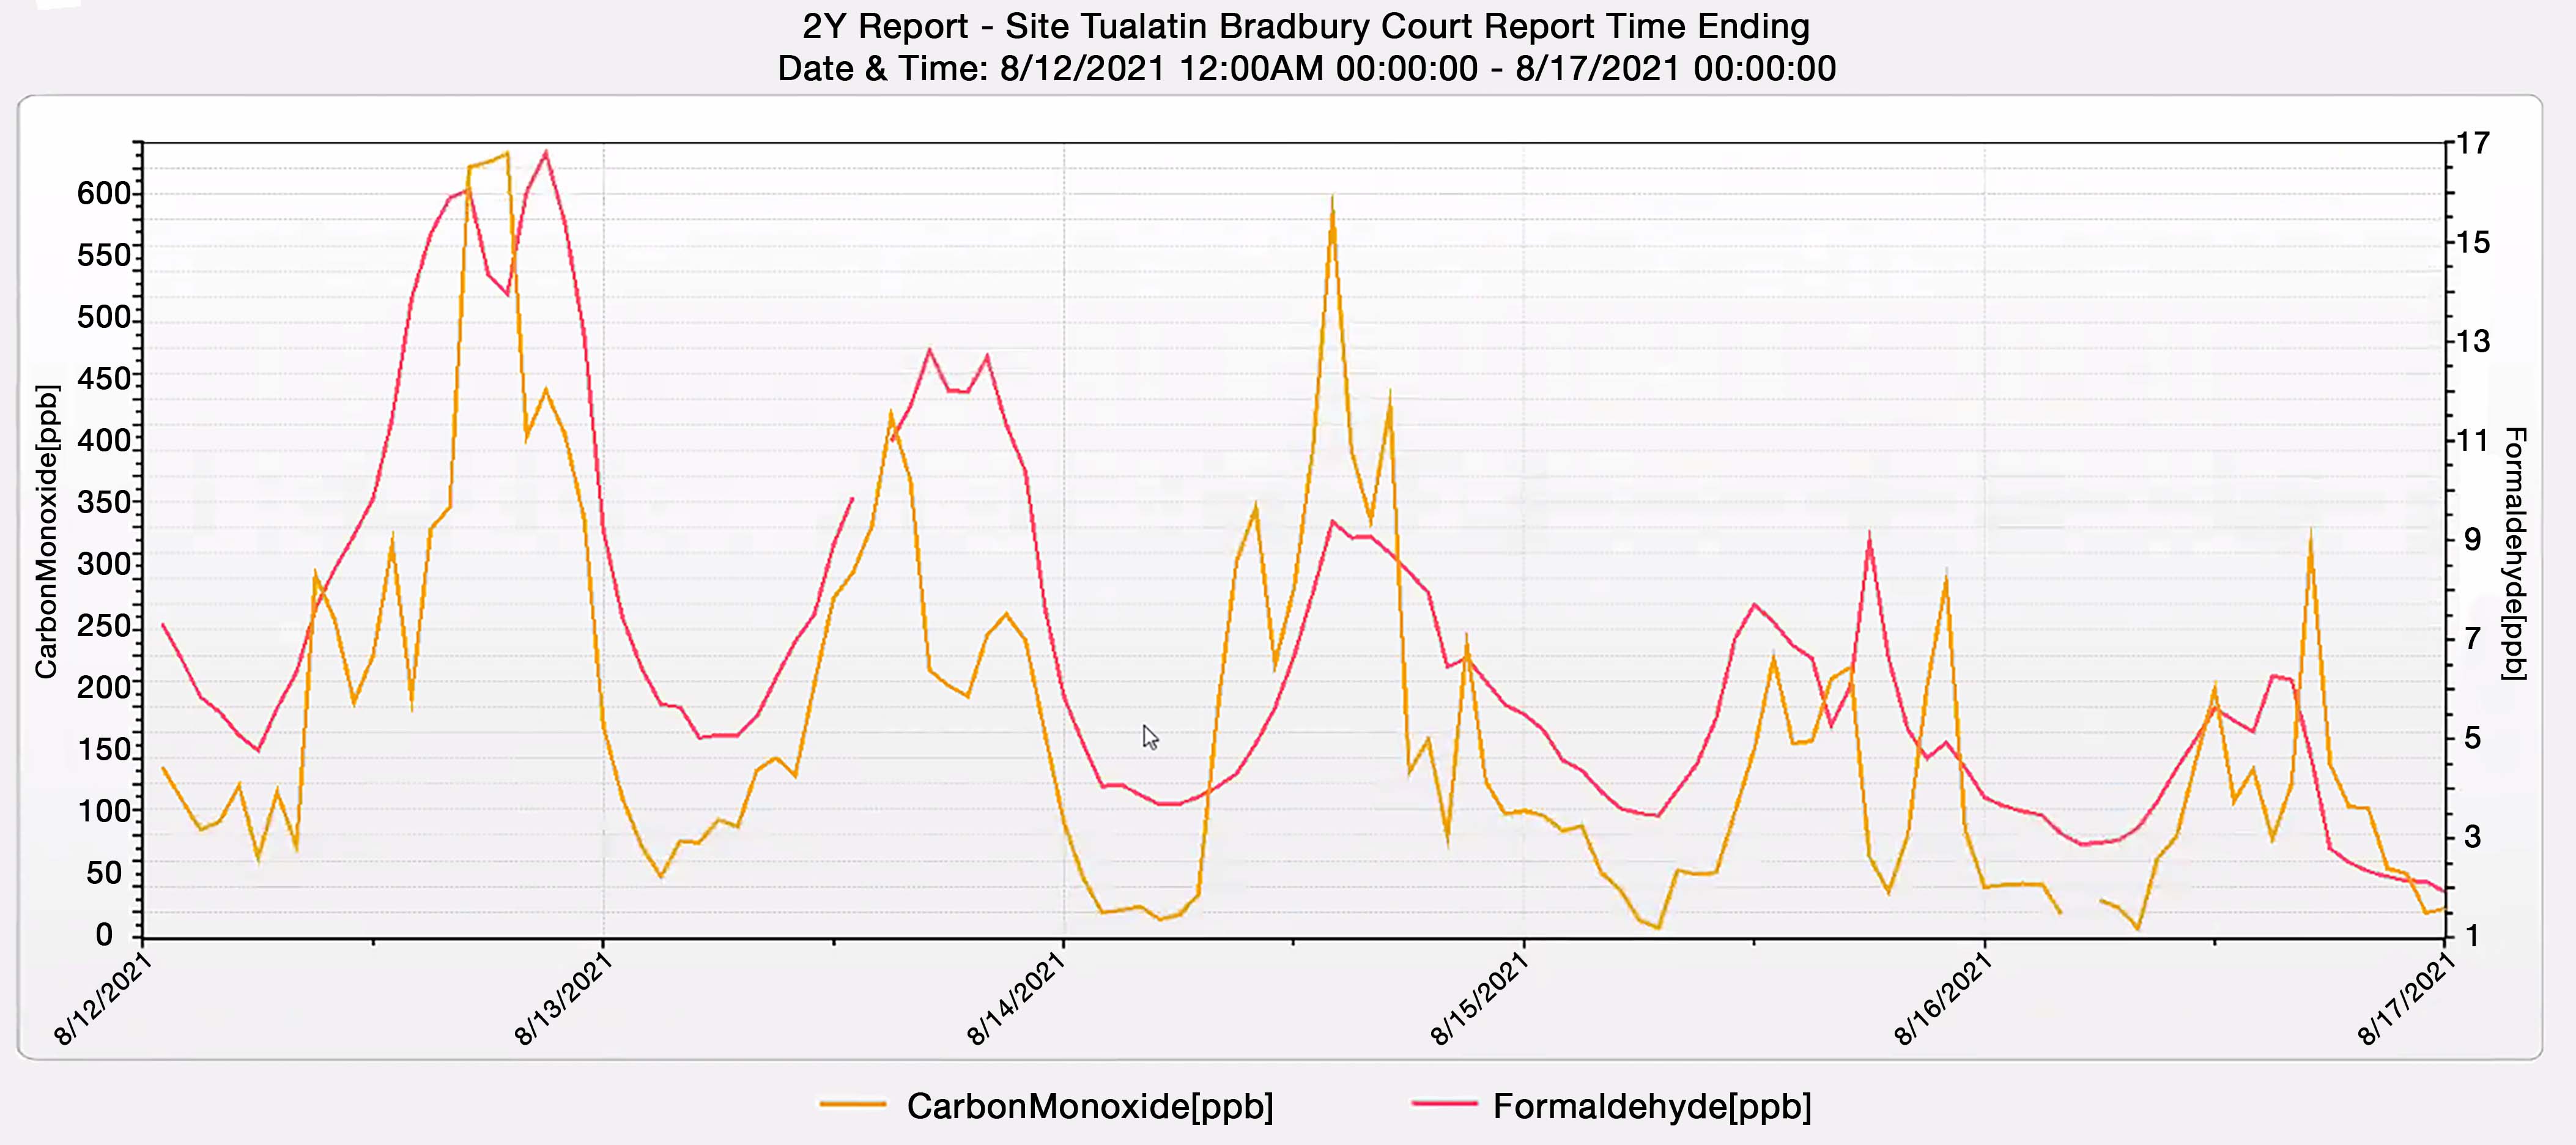 Figure 3: Formaldehyde and carbon monoxide, showing the strong correlation between the two wildfire tracers. While the diurnal cycle likely captures the often-bimodal wind pattern along the West Coast, with CO dropping at night  due to transport, formaldehyde values will also naturally drop at night because of their dependence on daytime photochemistry. 